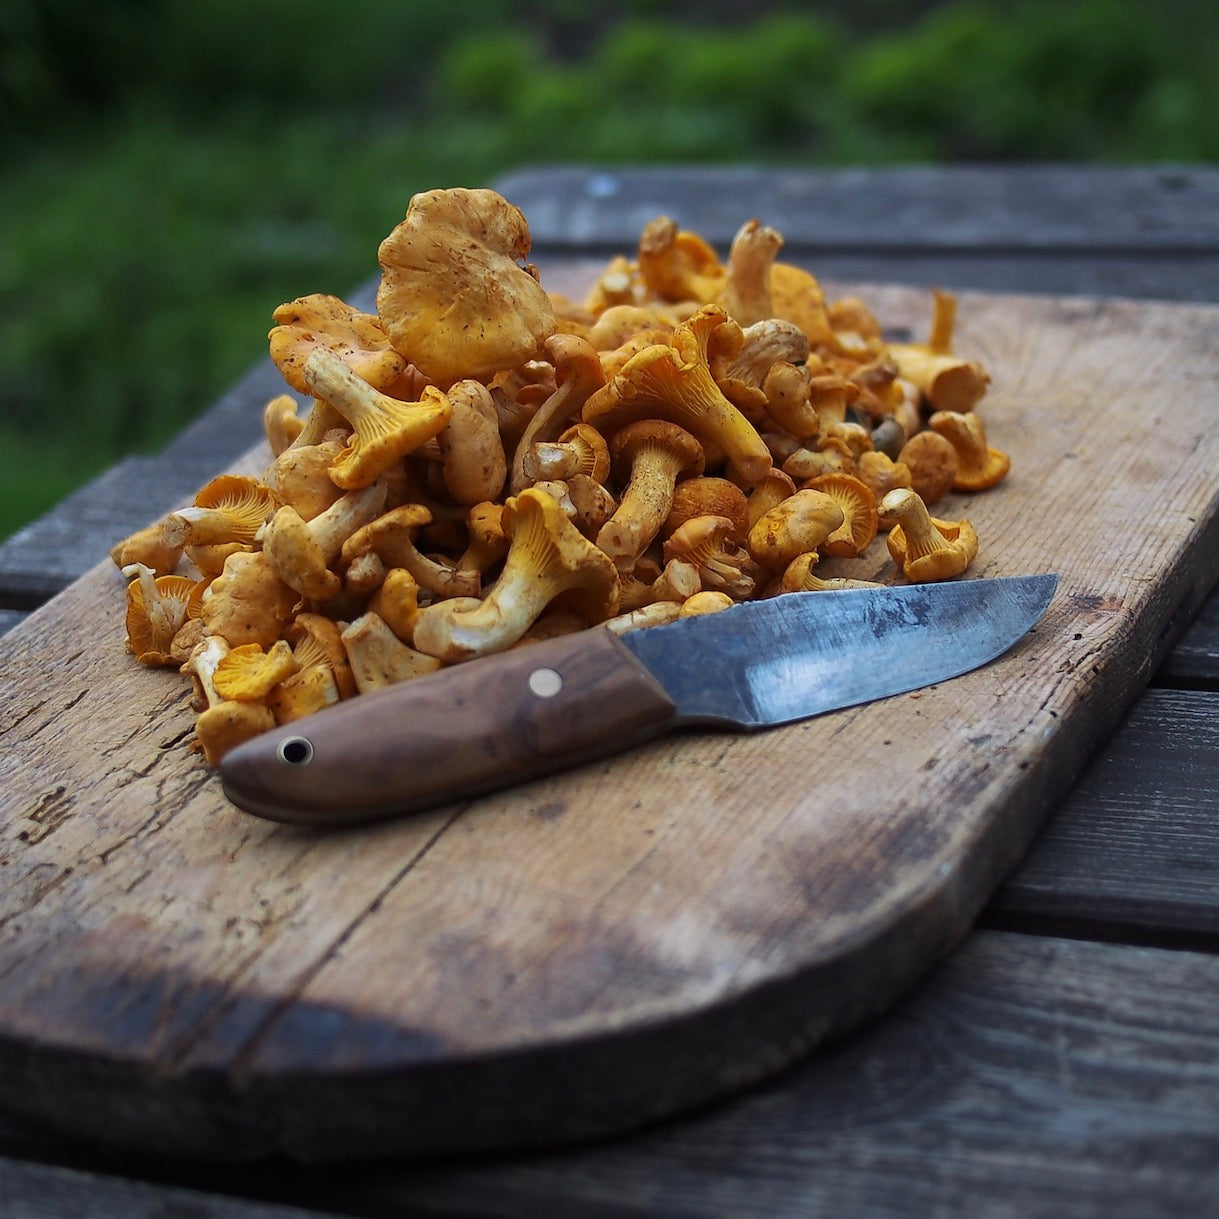 Shop Chanterelle mushrooms in singapore the new grocer